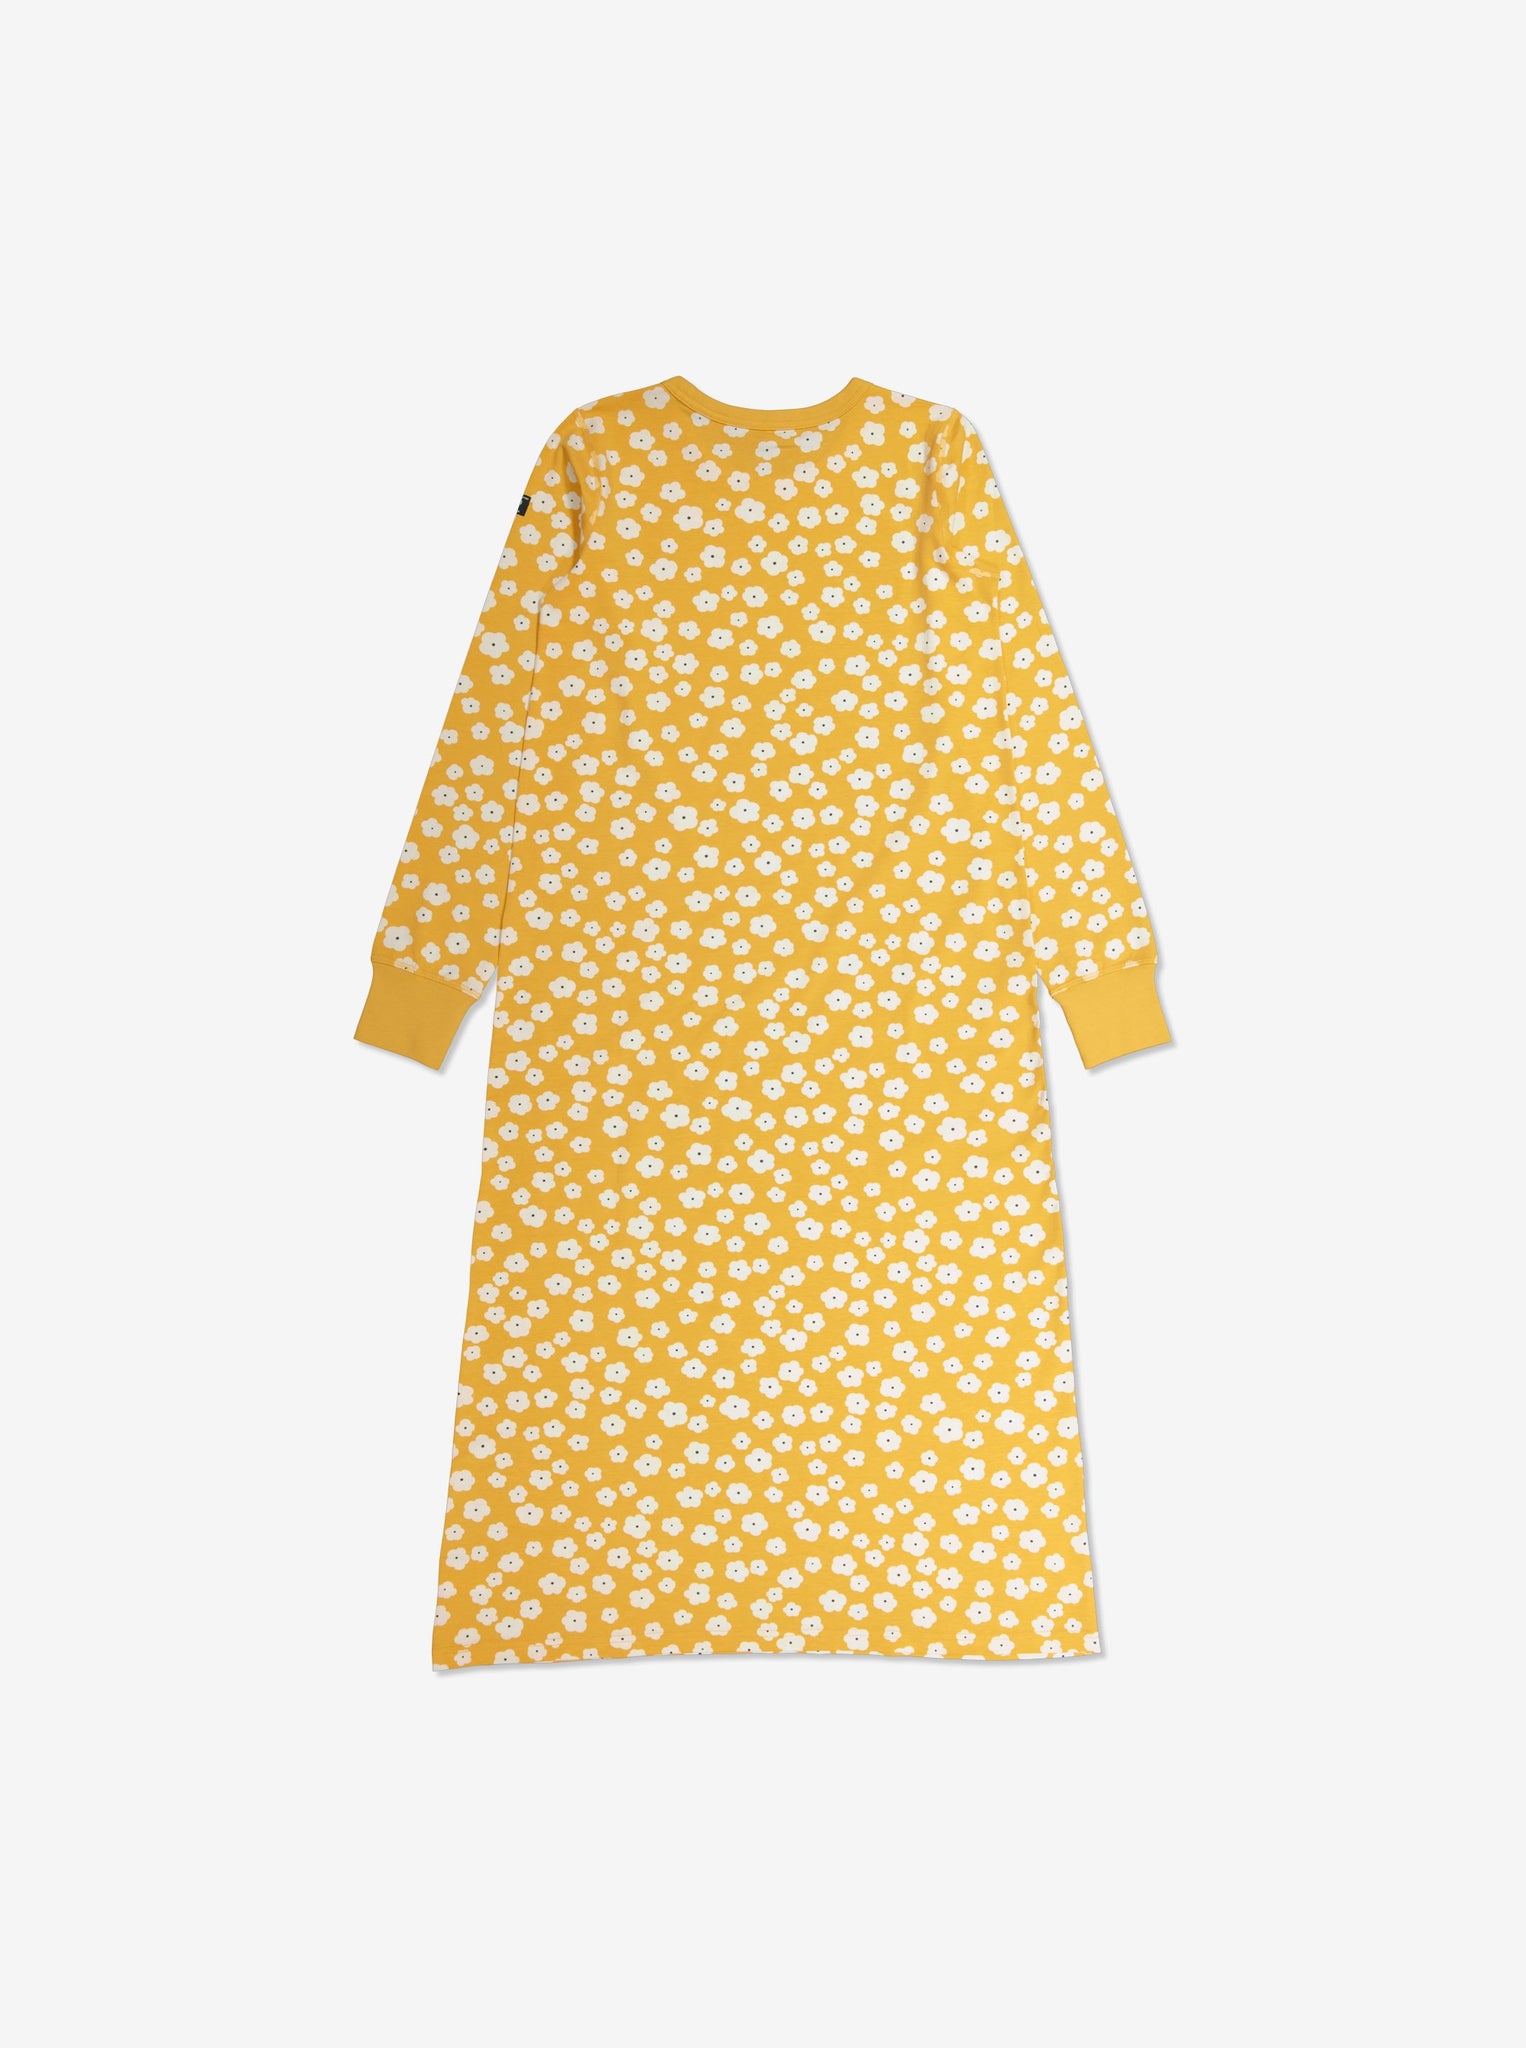  Organic Yellow Floral Adult Nightdress from Polarn O. Pyret Kidswear. Made from ethically sourced materials.